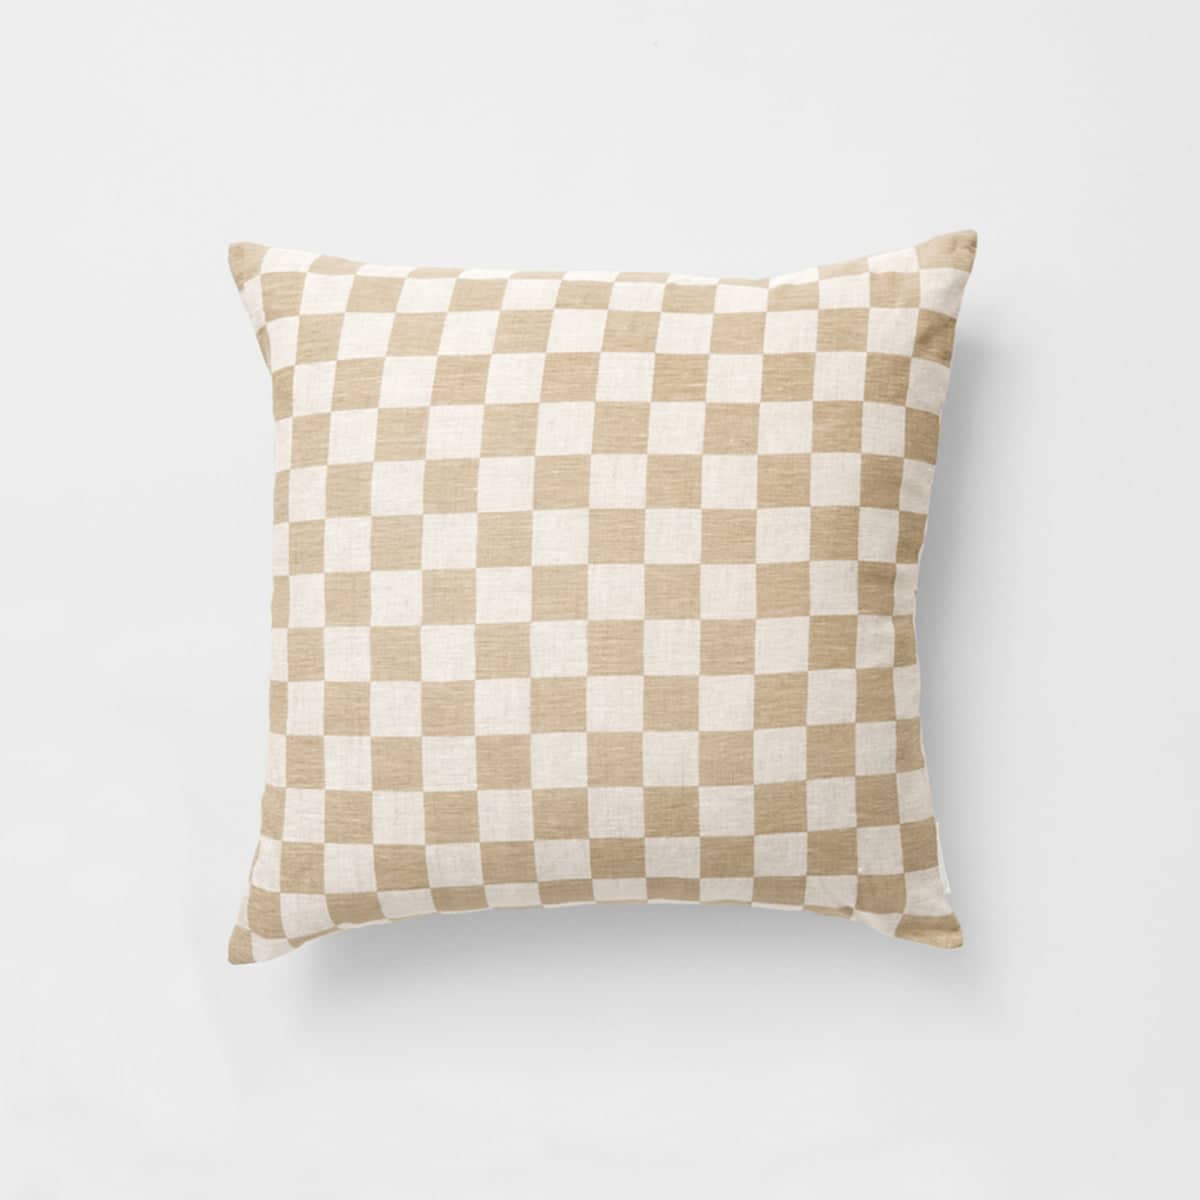 Patterned Cushions